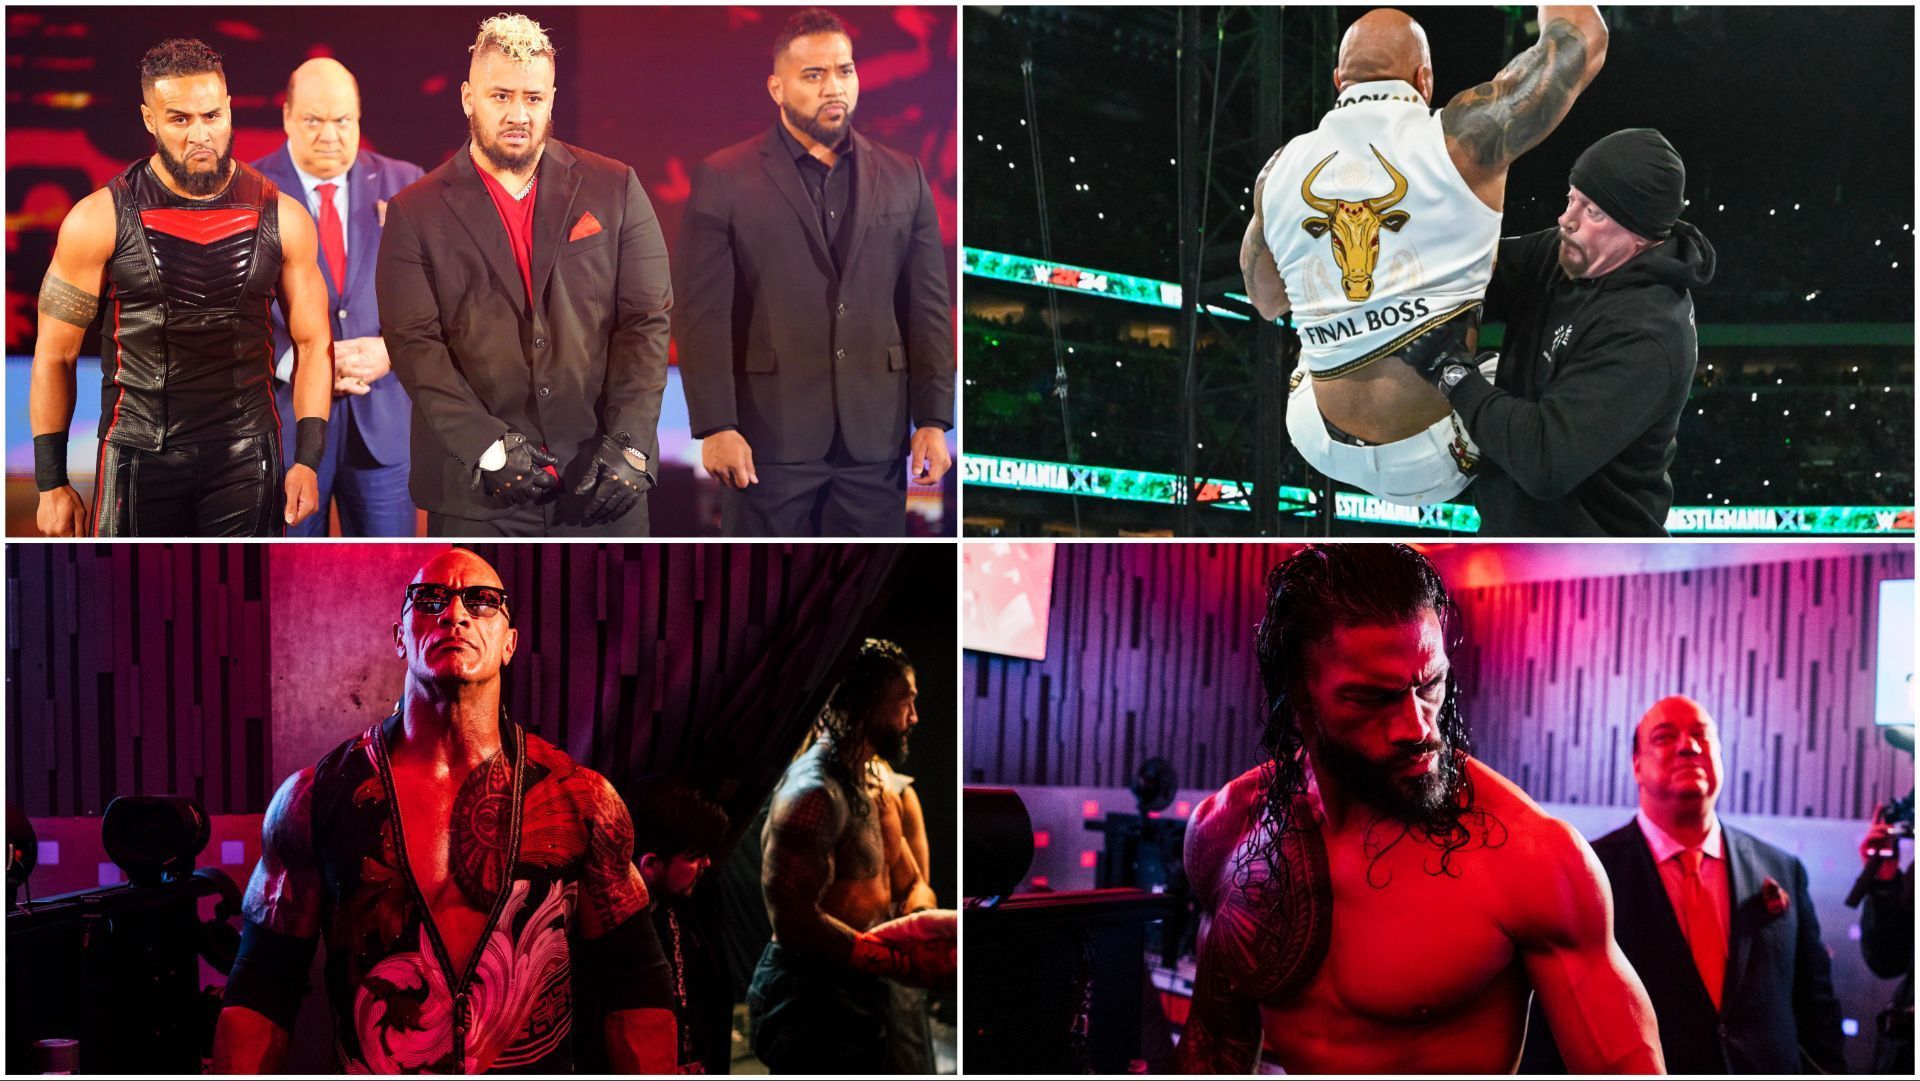 The Bloodline members on WWE SmackDown, and backstage at WrestleMania XL